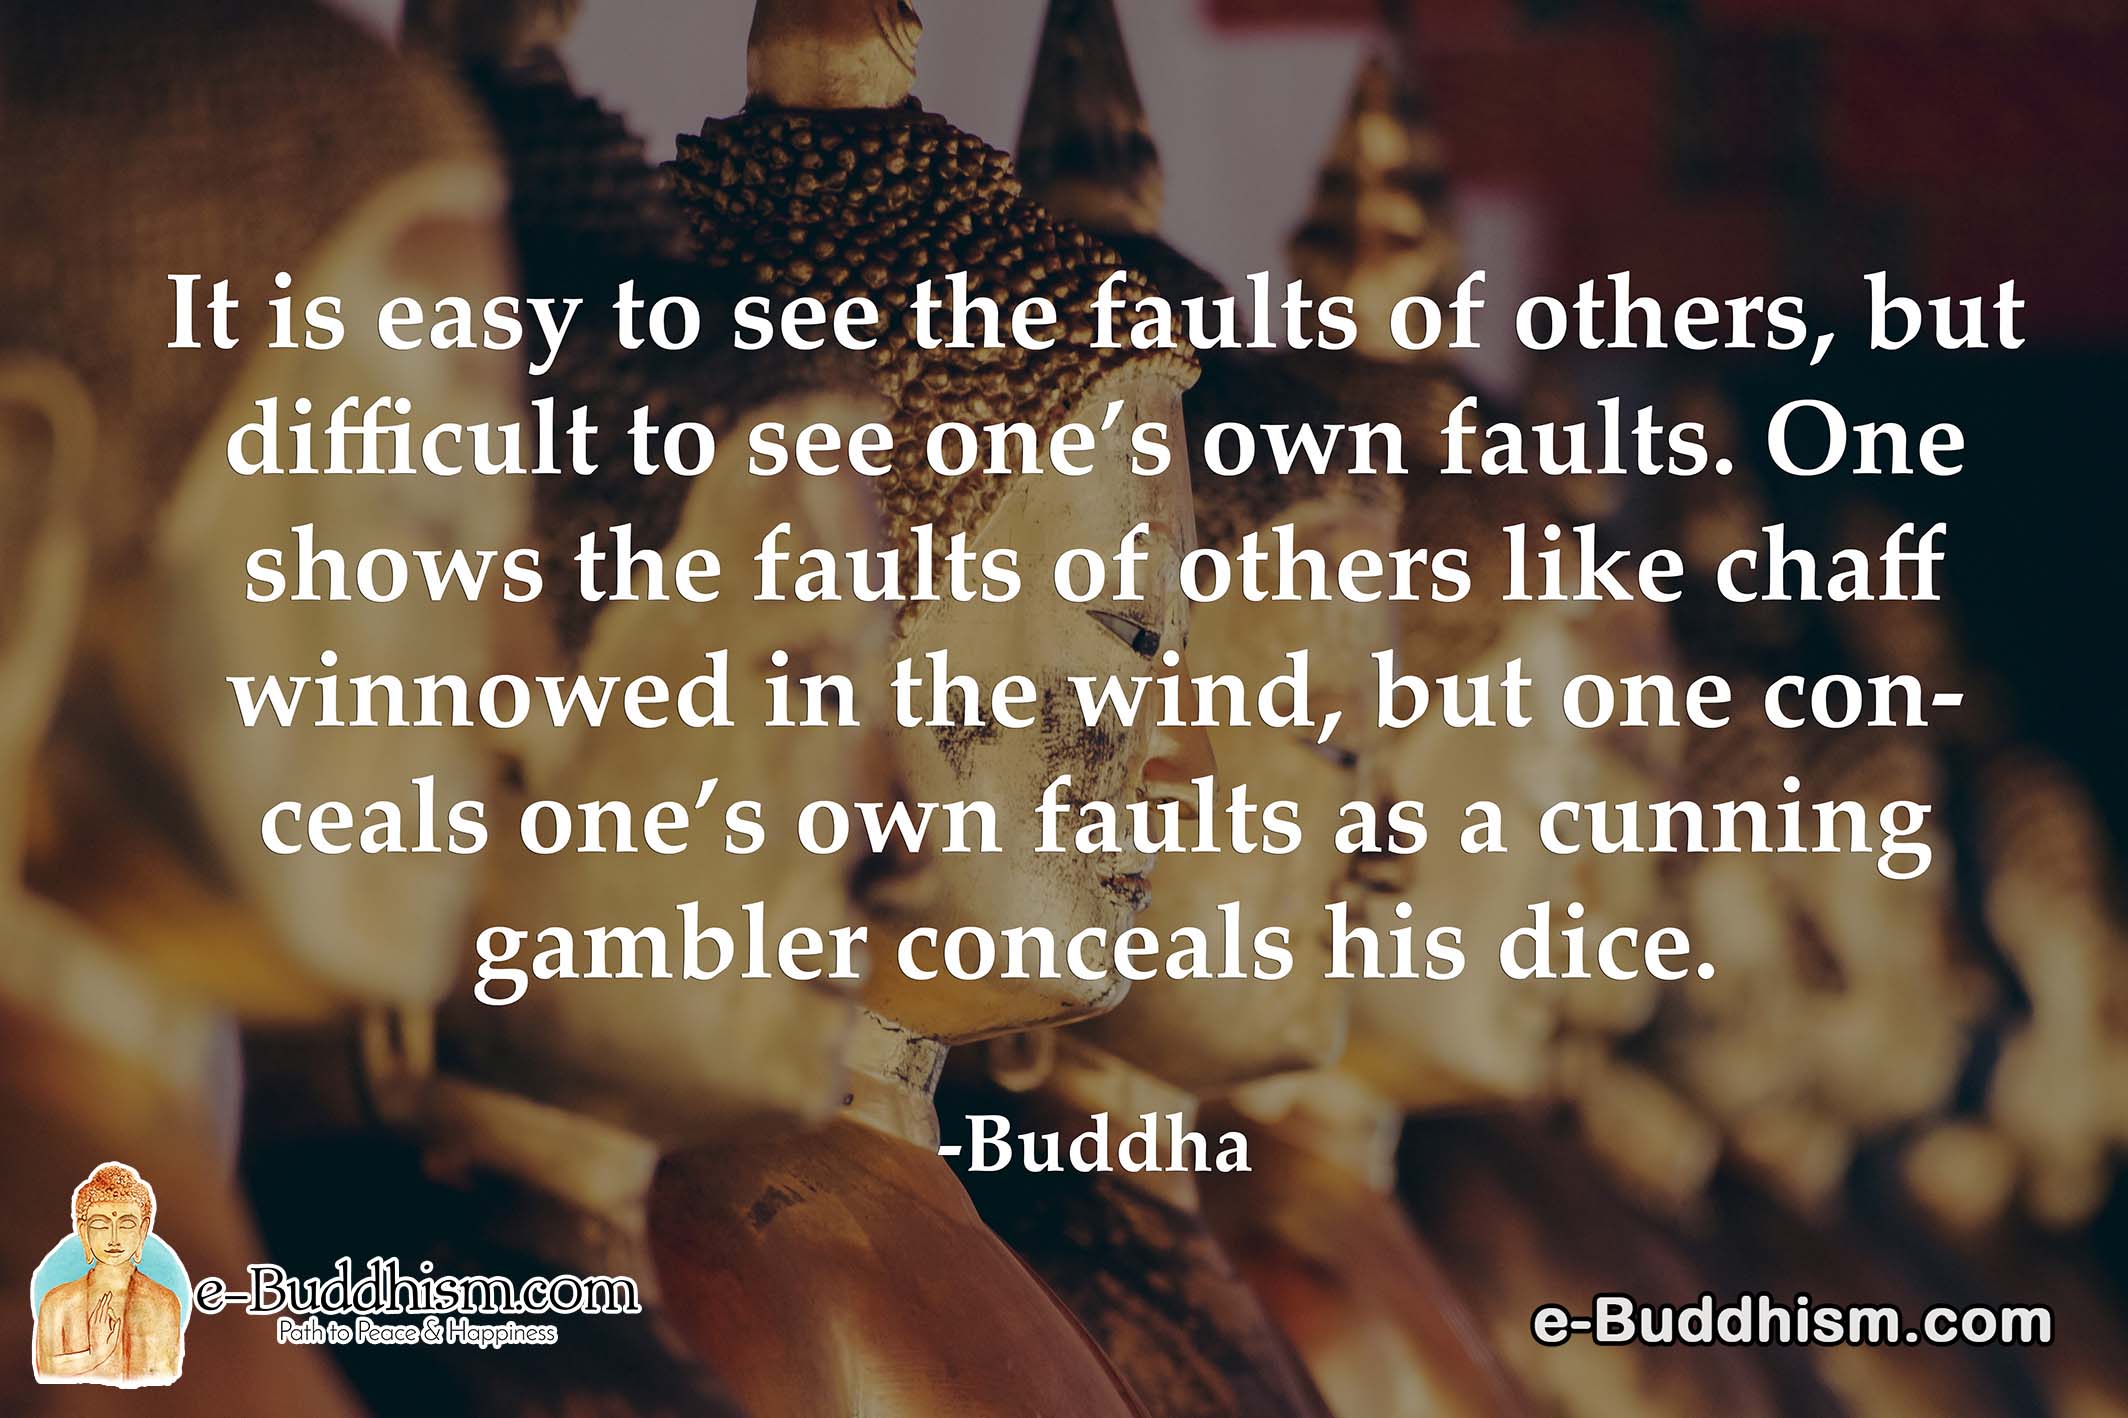 It is easy to see the fault of others, but difficult to one's own faults. One shows the faults of others like chaff winnowed in the wind, but one conceals one's own faults as a cunning gambler conceals his dice. - Buddha